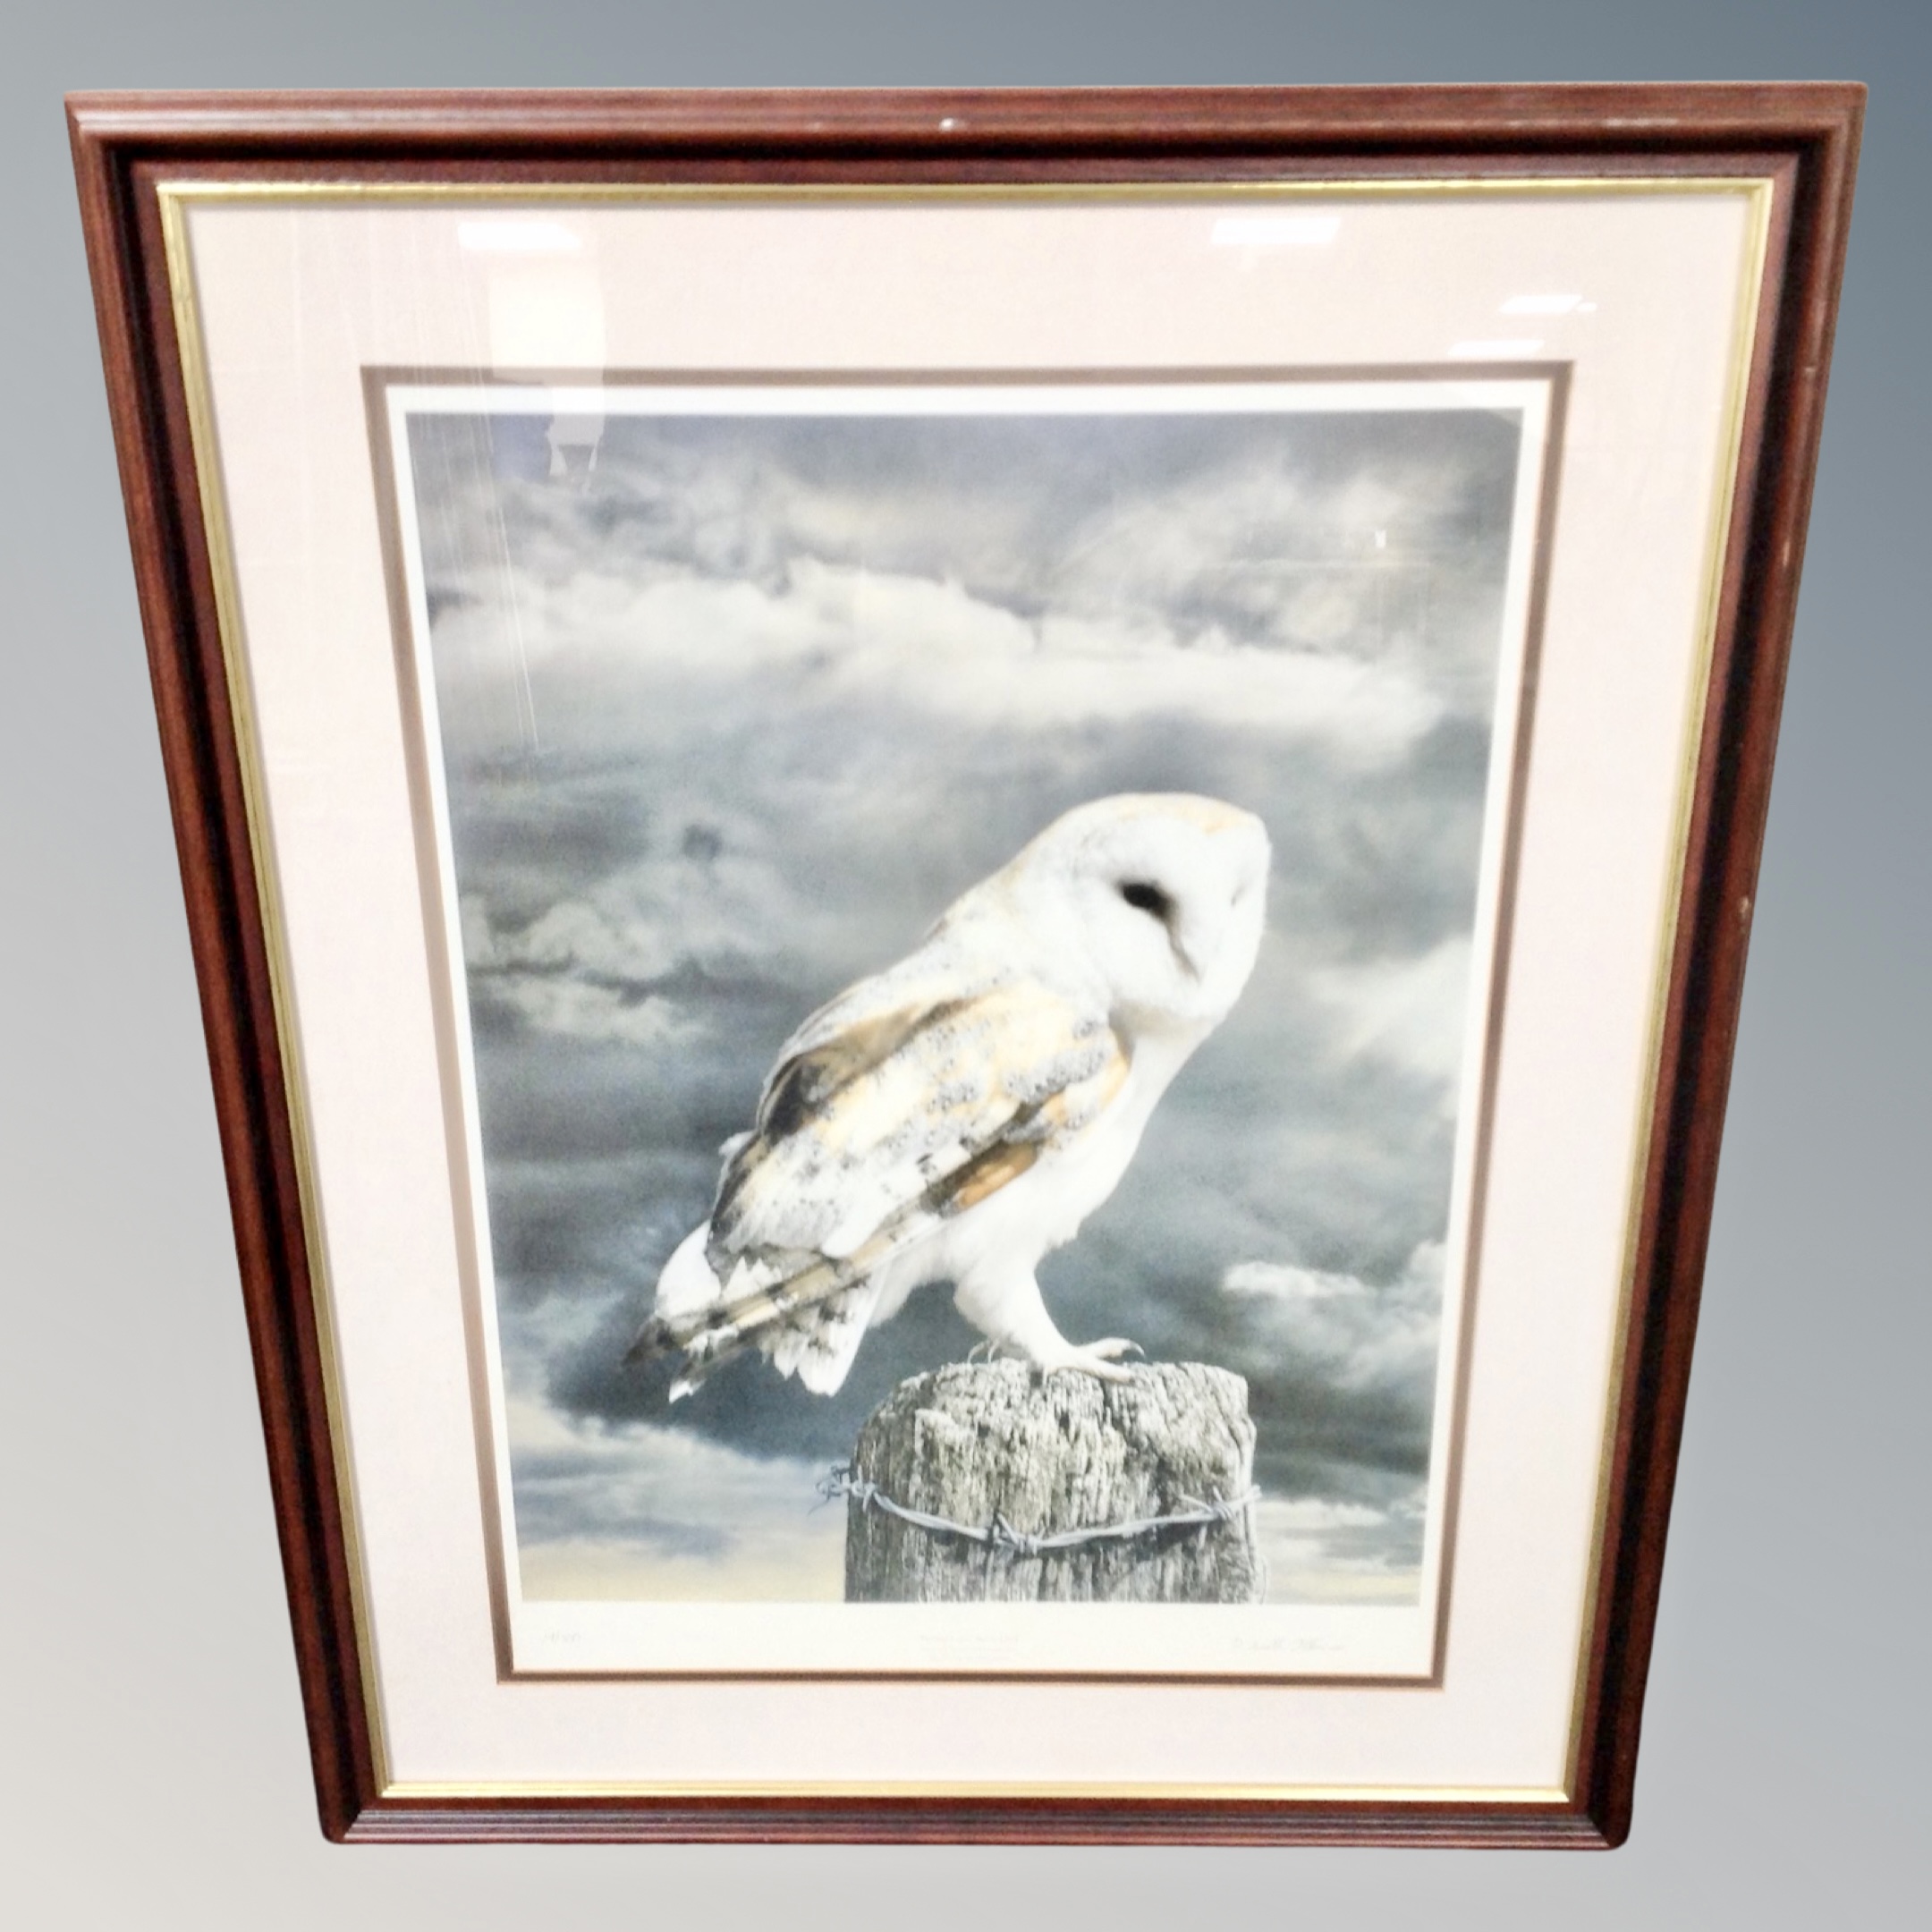 A D Scott Atkinson signed limited edition print - Portrait of a Barn owl 19/500 framed.